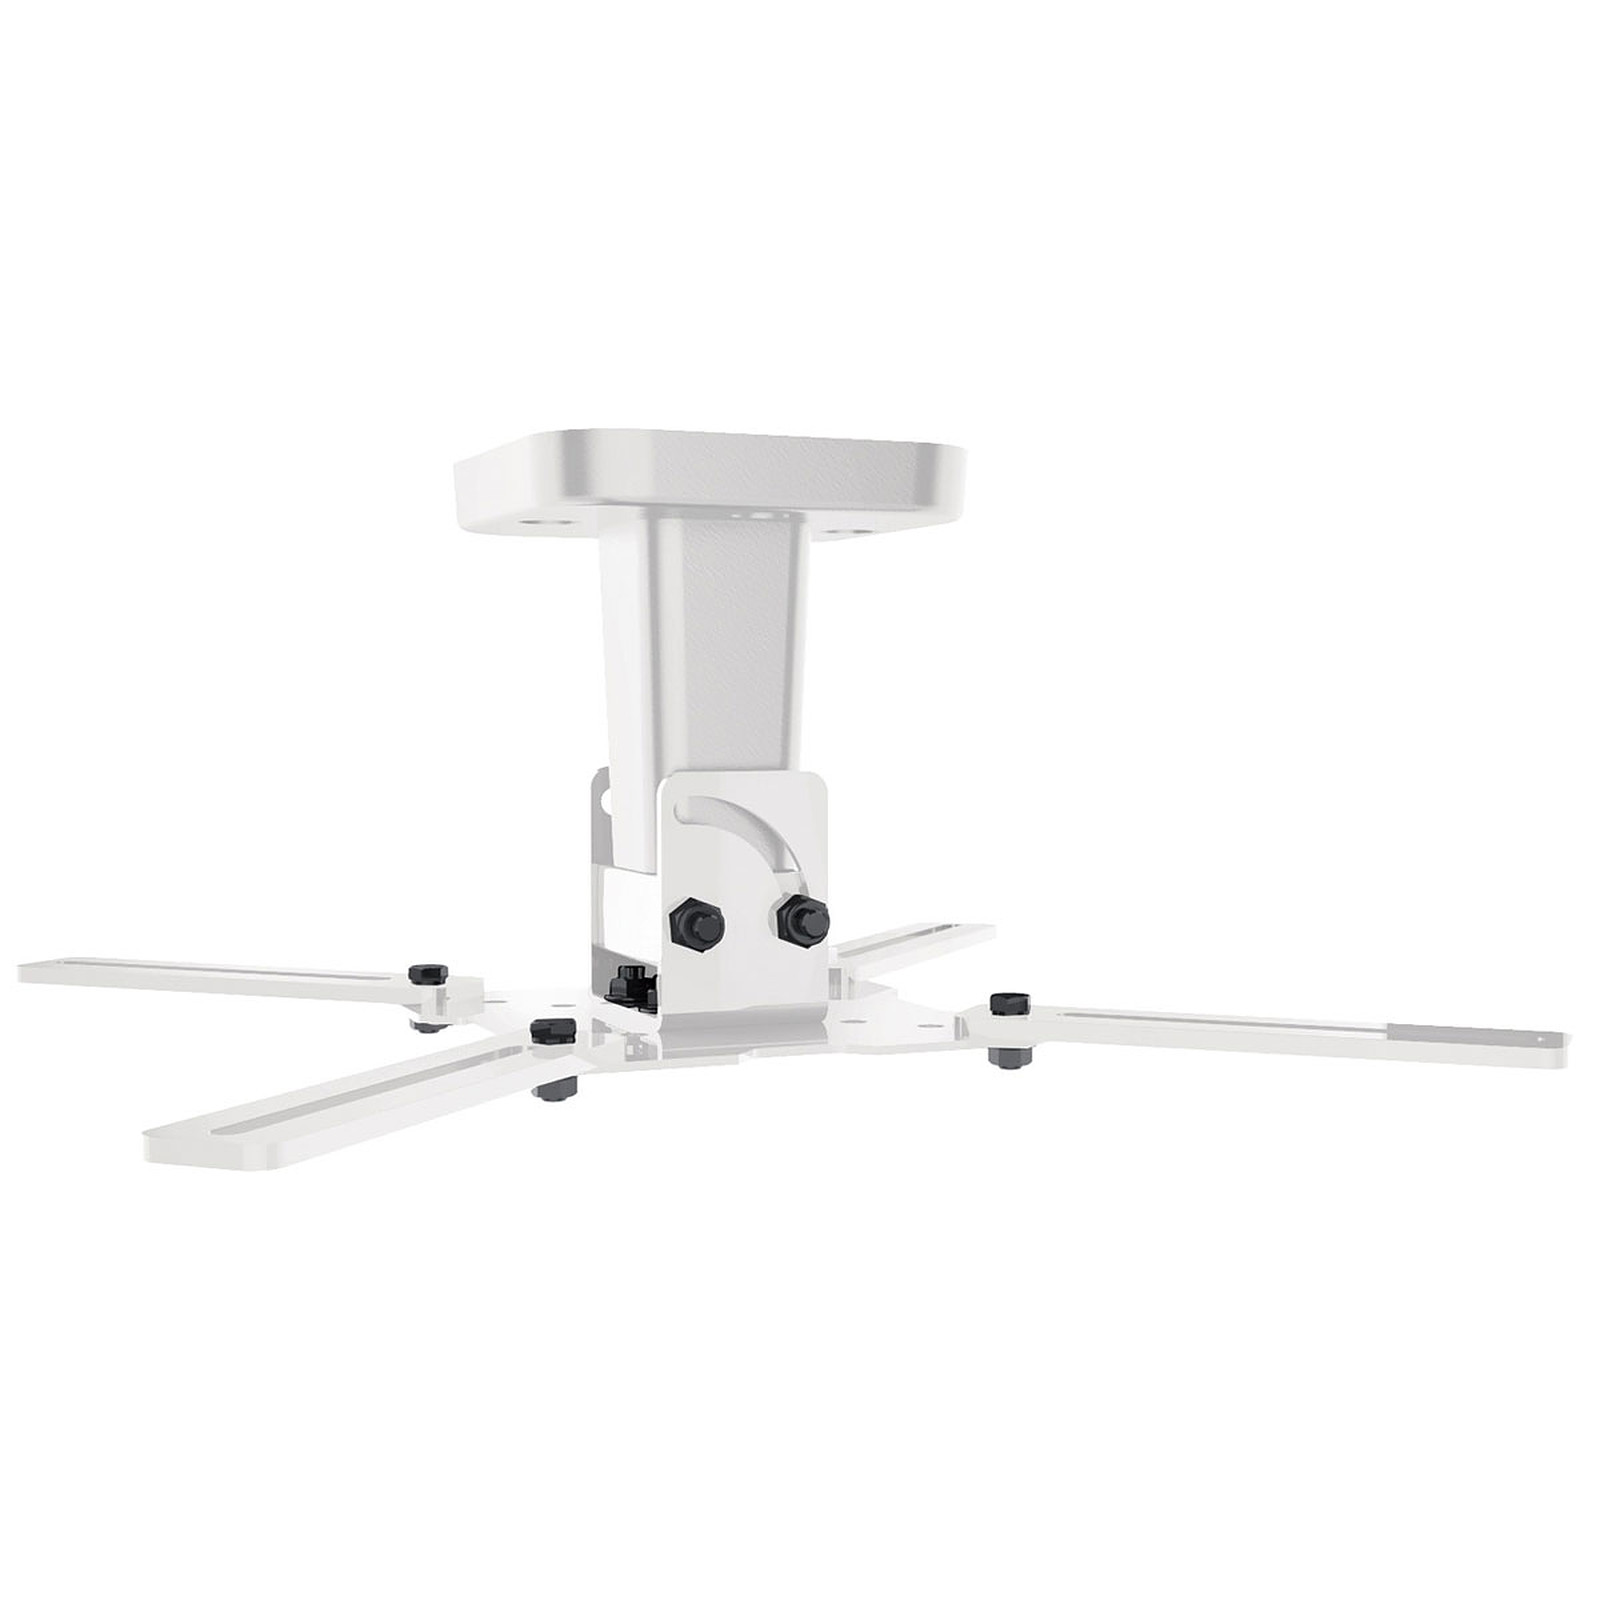 Meliconi PRO 100 Blanc · Occasion - Support plafond videoprojecteur Meliconi - Occasion